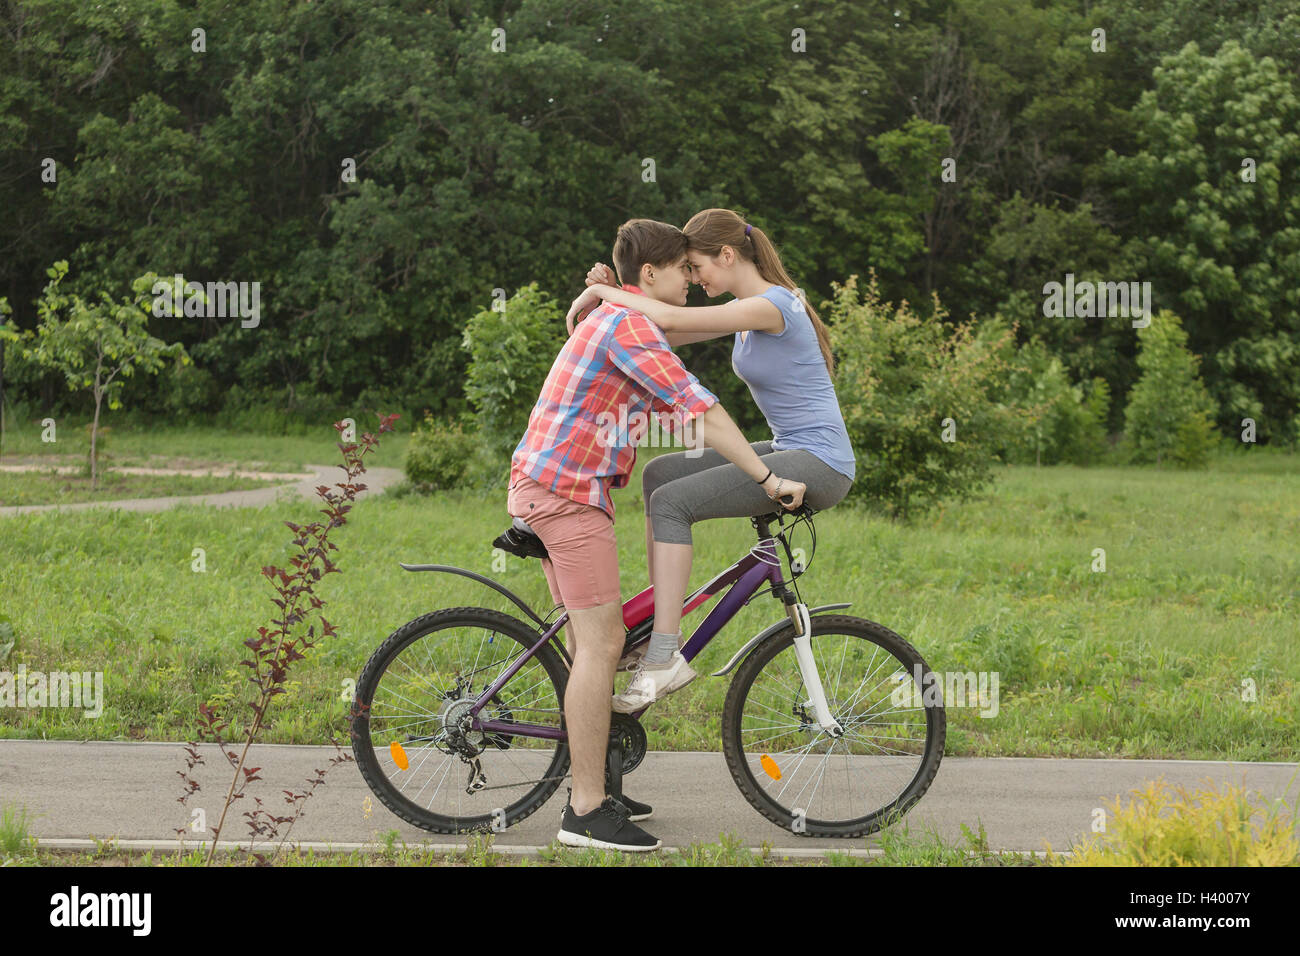 Romantic couple sitting face to face on bicycle against trees at park Stock Photo